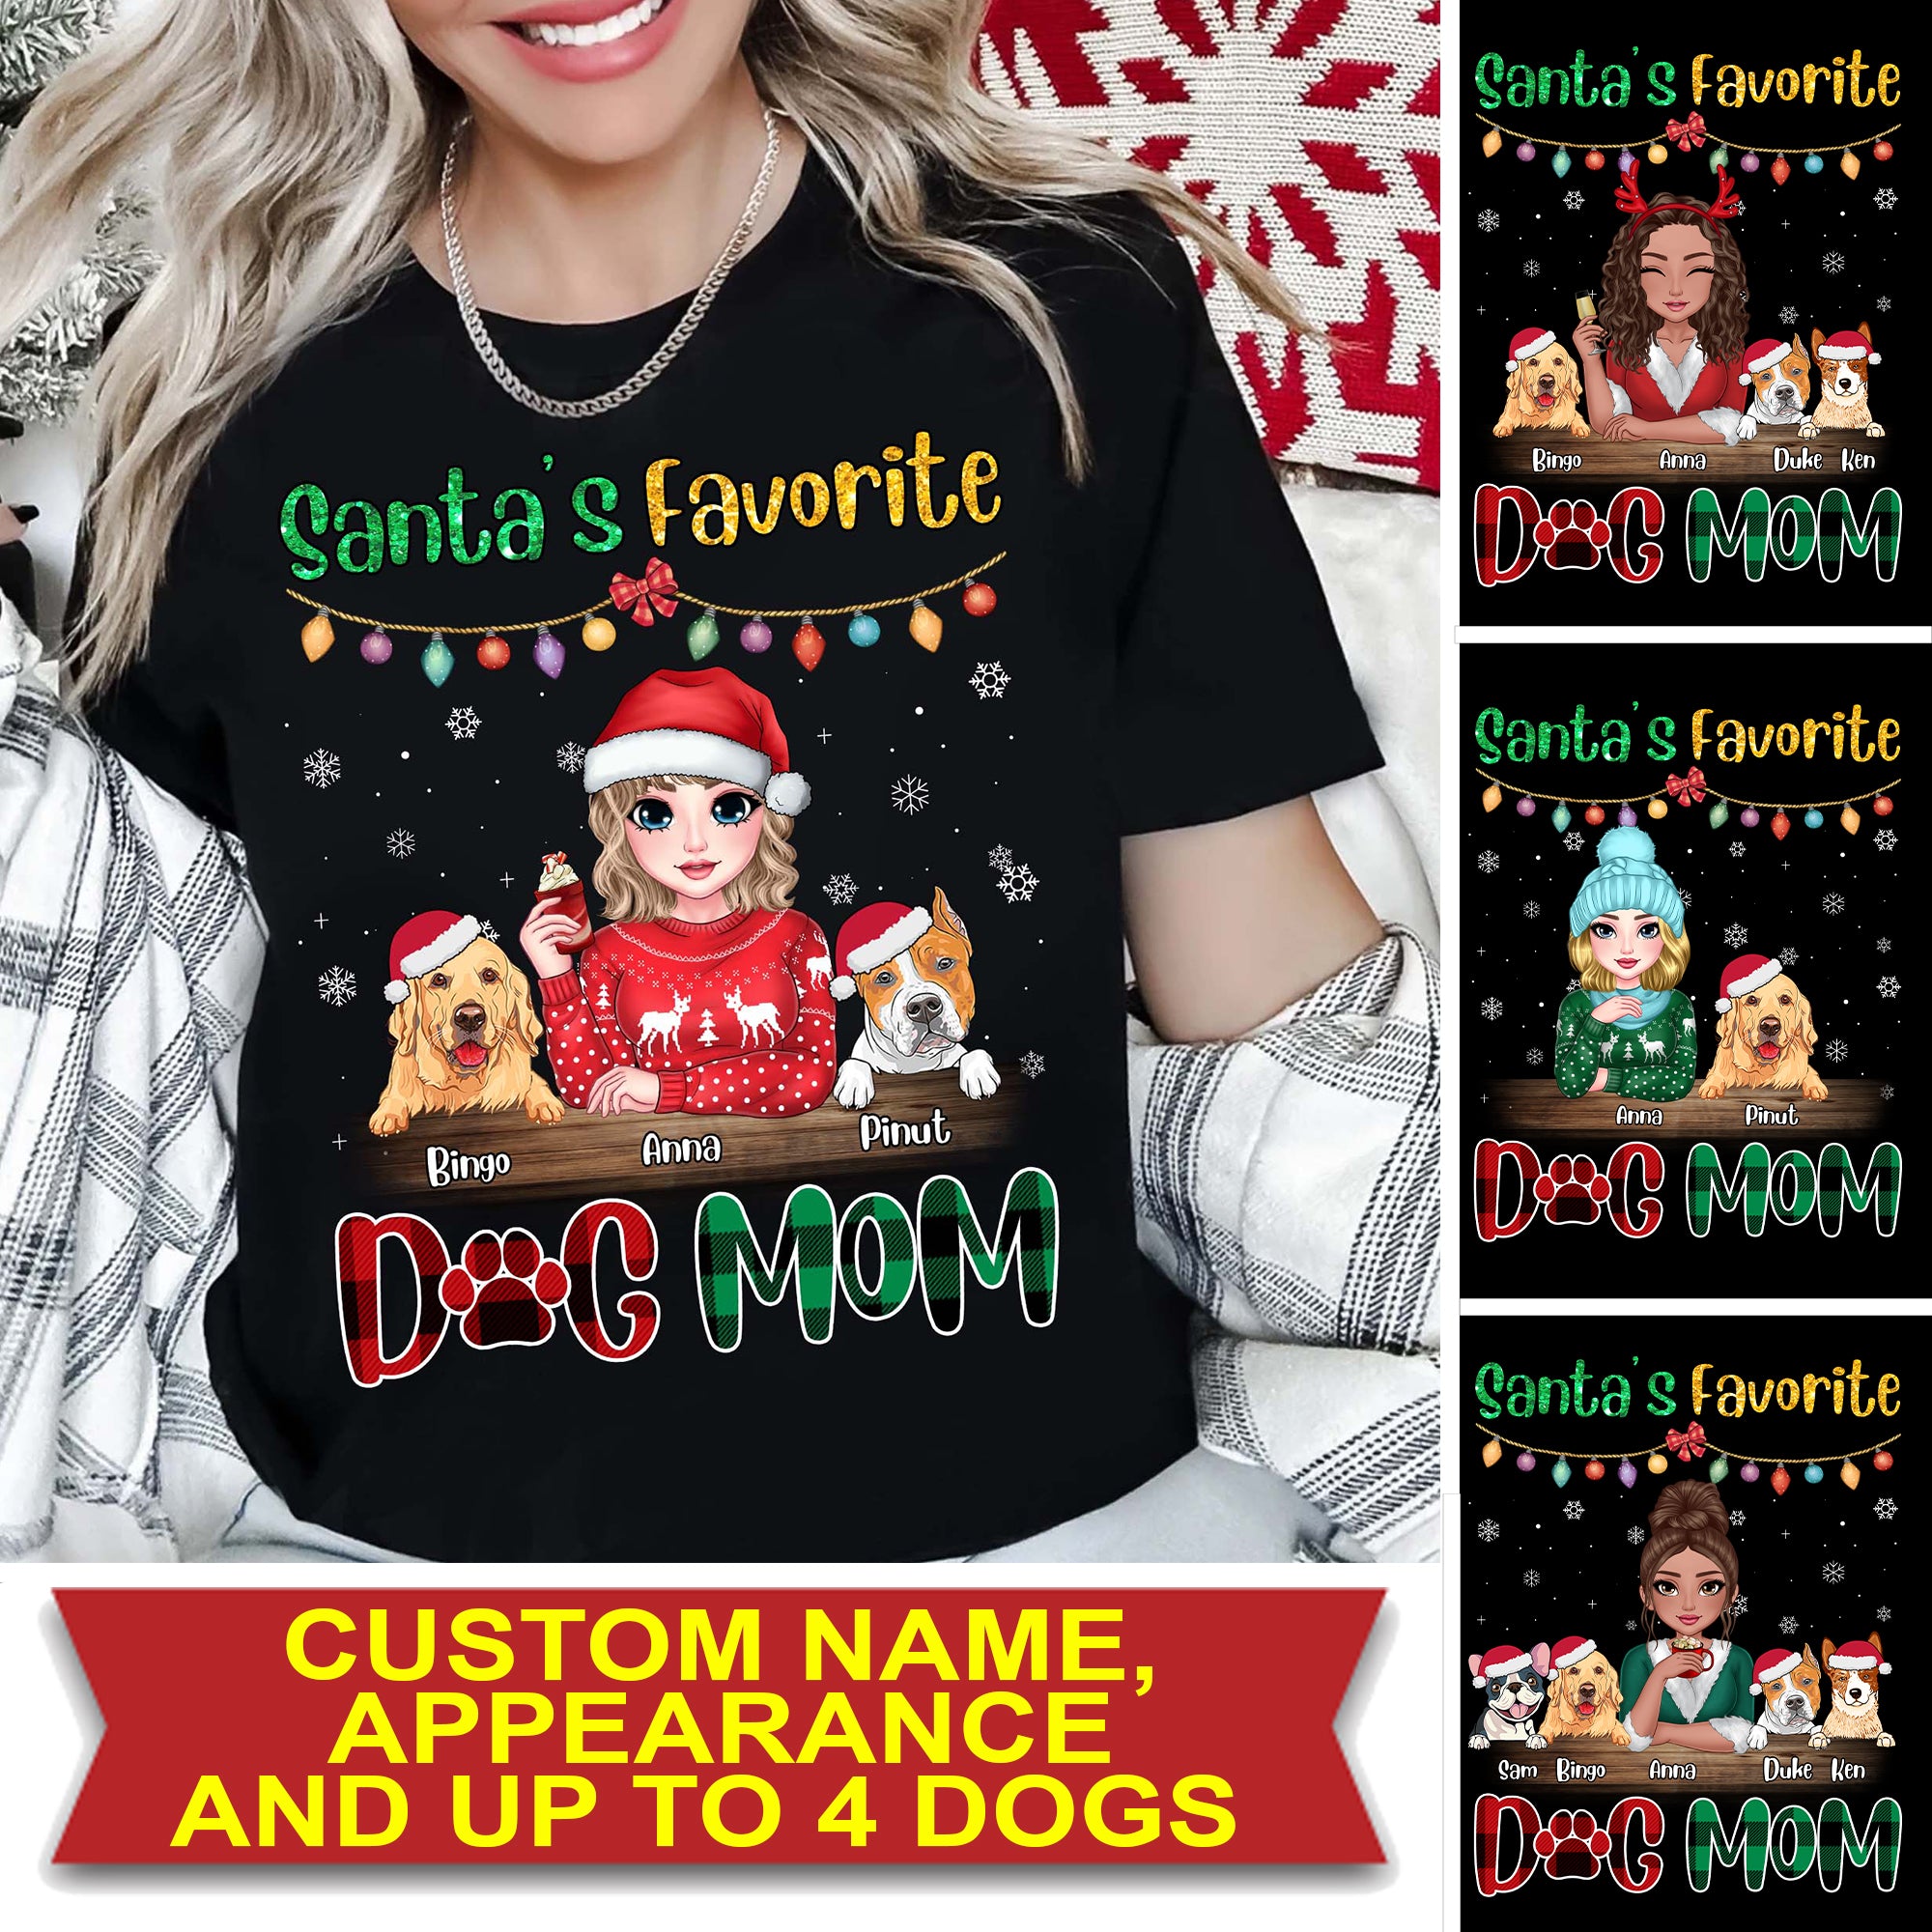 Santa's Favorite Dog Mom - Custom Appearance And Name, Personalized Sweatshirt - Family Gift, Gift For Pet Lover, Xmas Gift